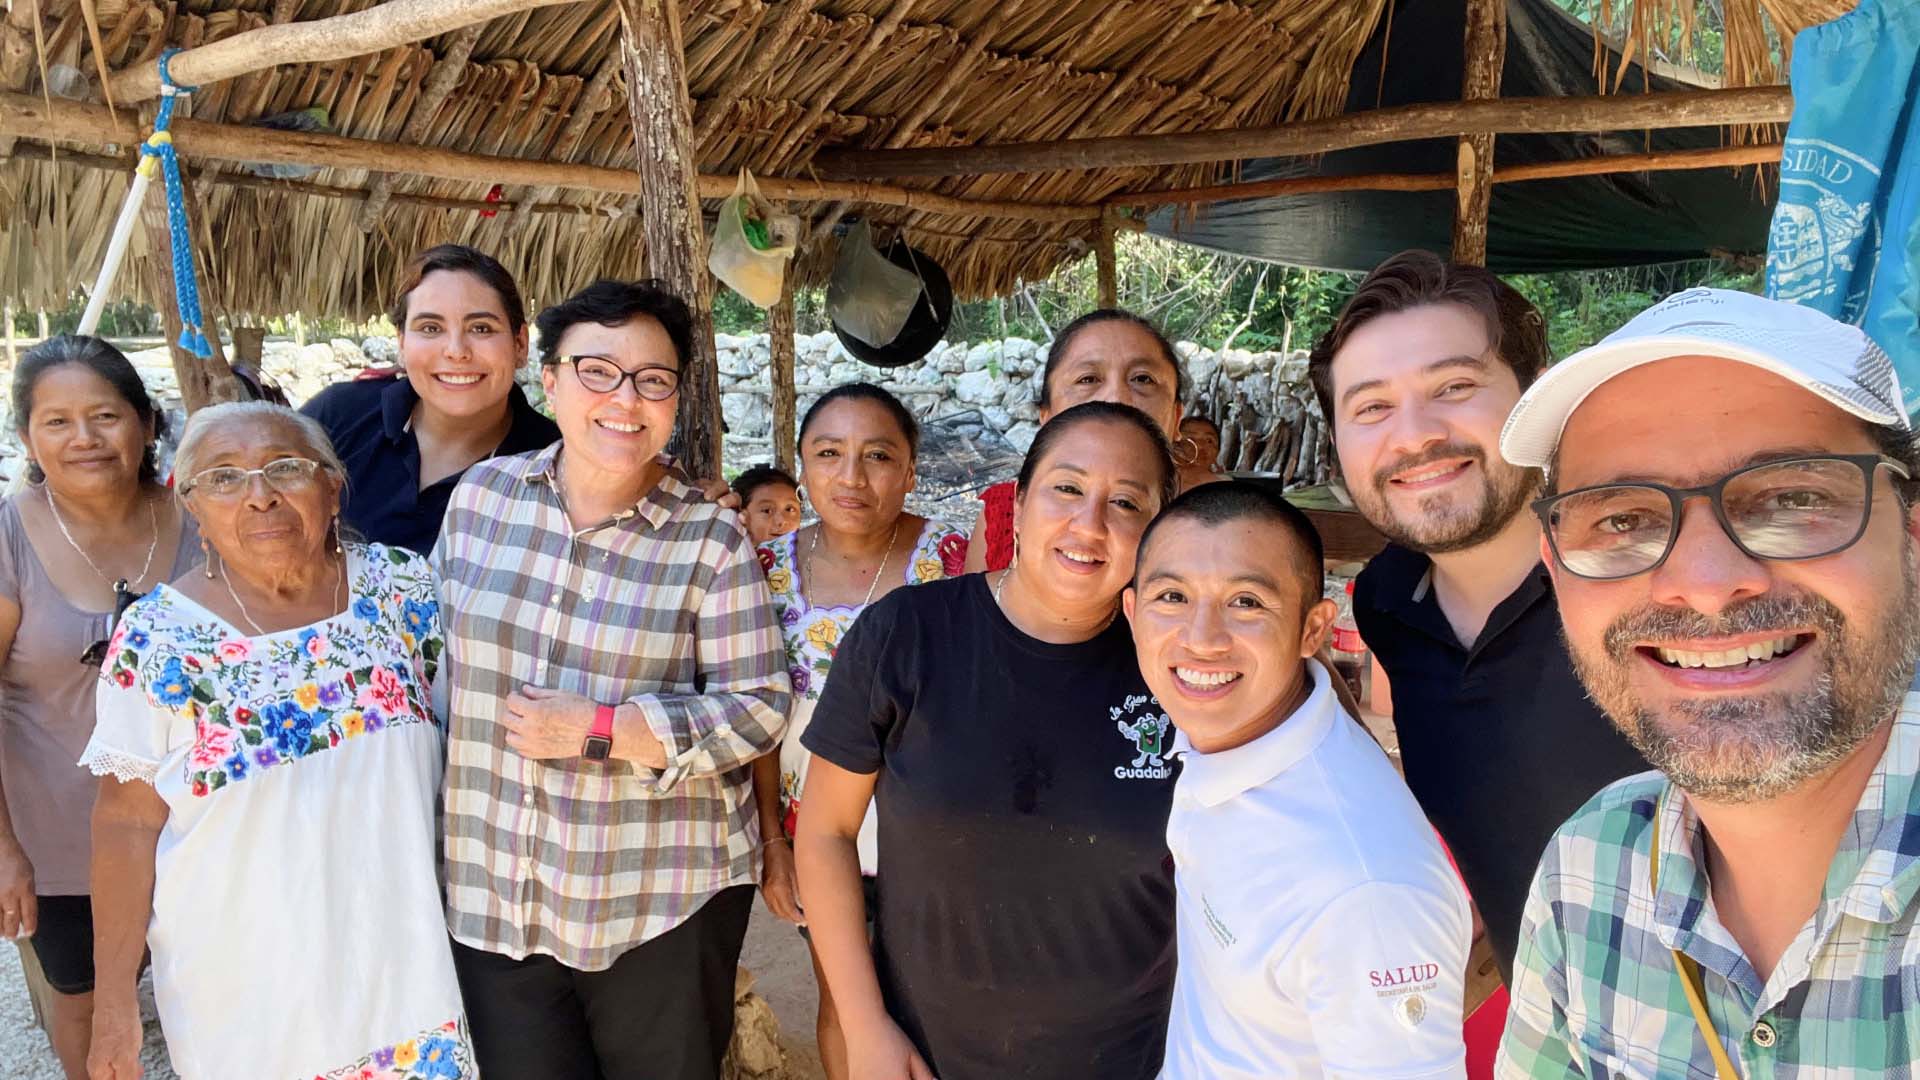 Selfie taken by Andrés, smiling in a cap and glasses in a green and blue checkered shirt with a group of people from the Mayan community smiling next to the research team, all huddled under a wooden-roofed structure.